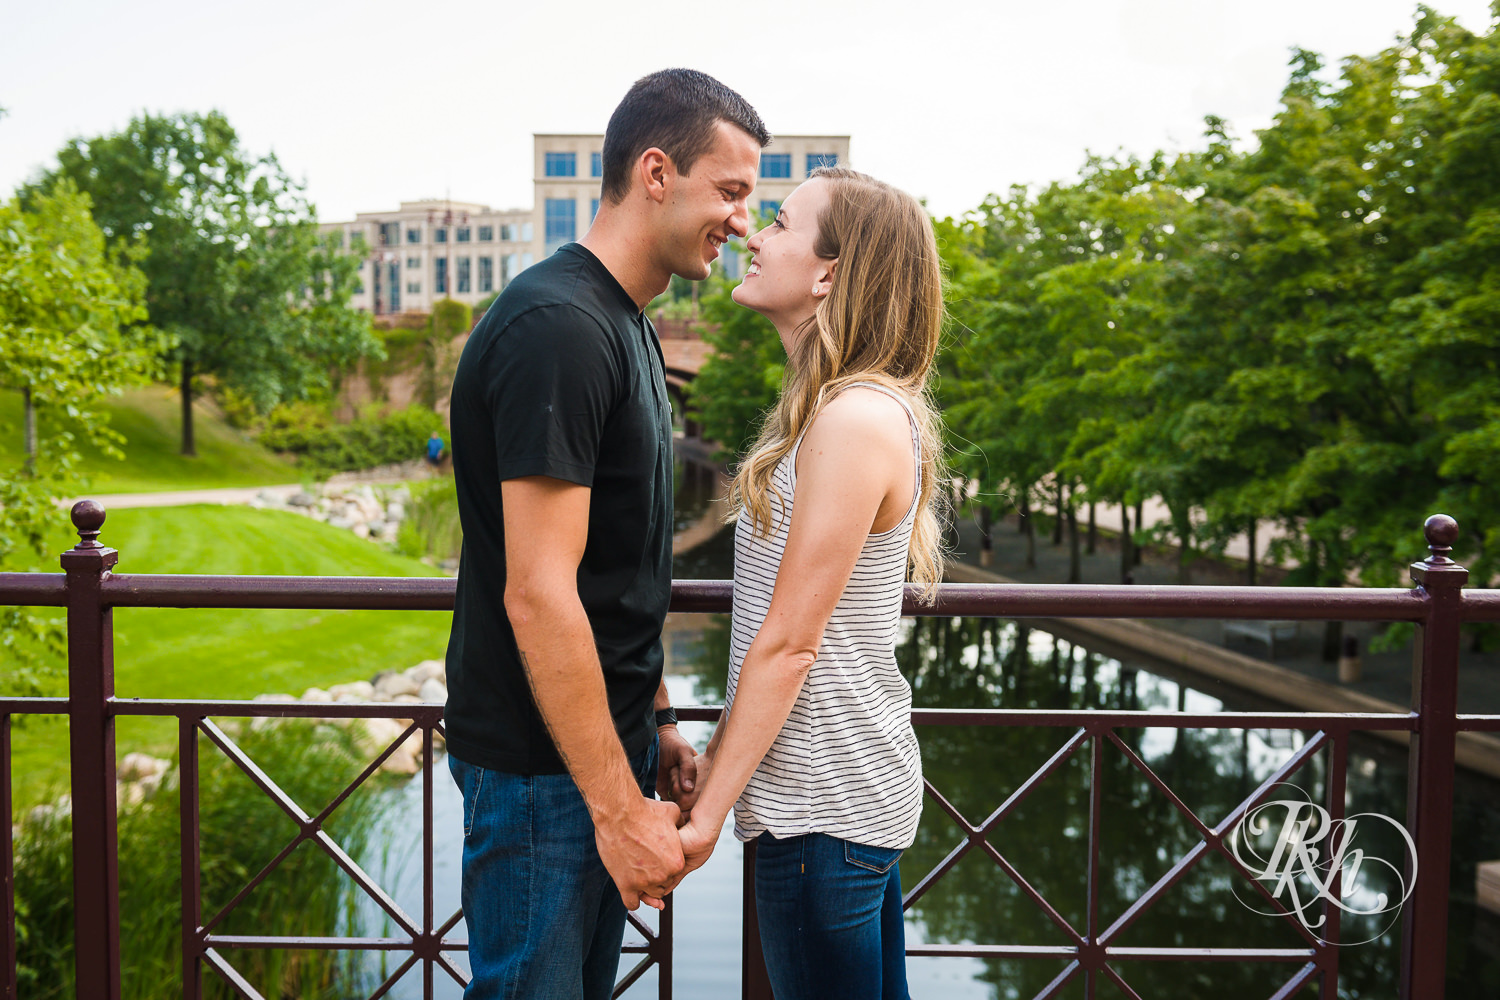 Man and woman in T-shirts and jeans smile on bridge in Centennial Lakes Park in Edina, Minnesota.